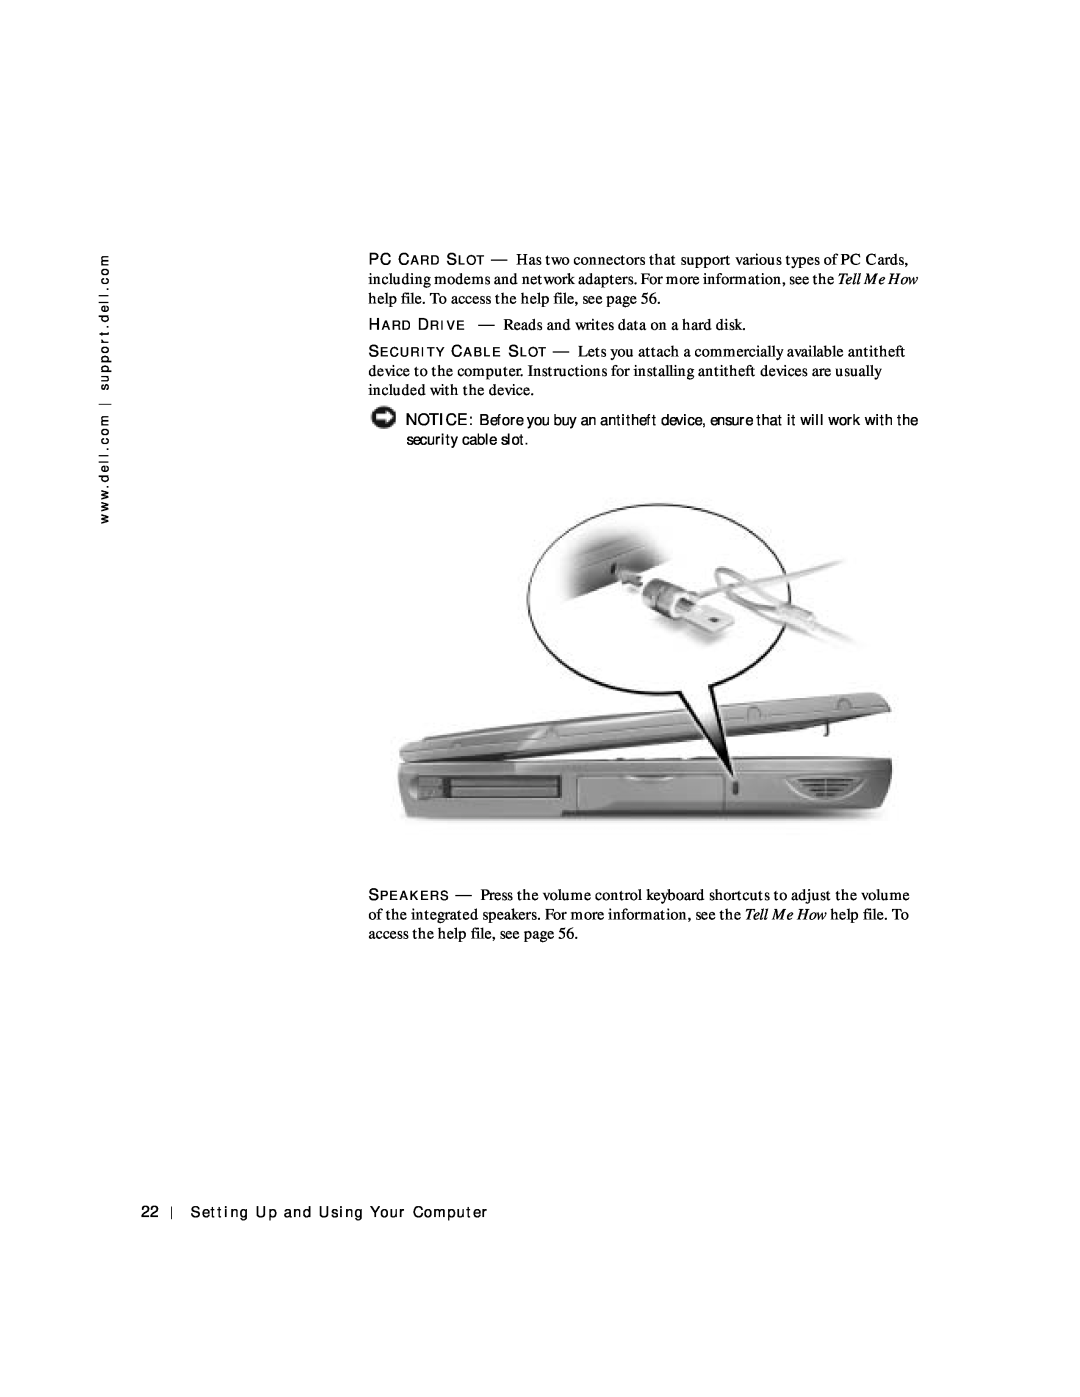 Dell 4150 owner manual HA R D DR I V E - Reads and writes data on a hard disk 